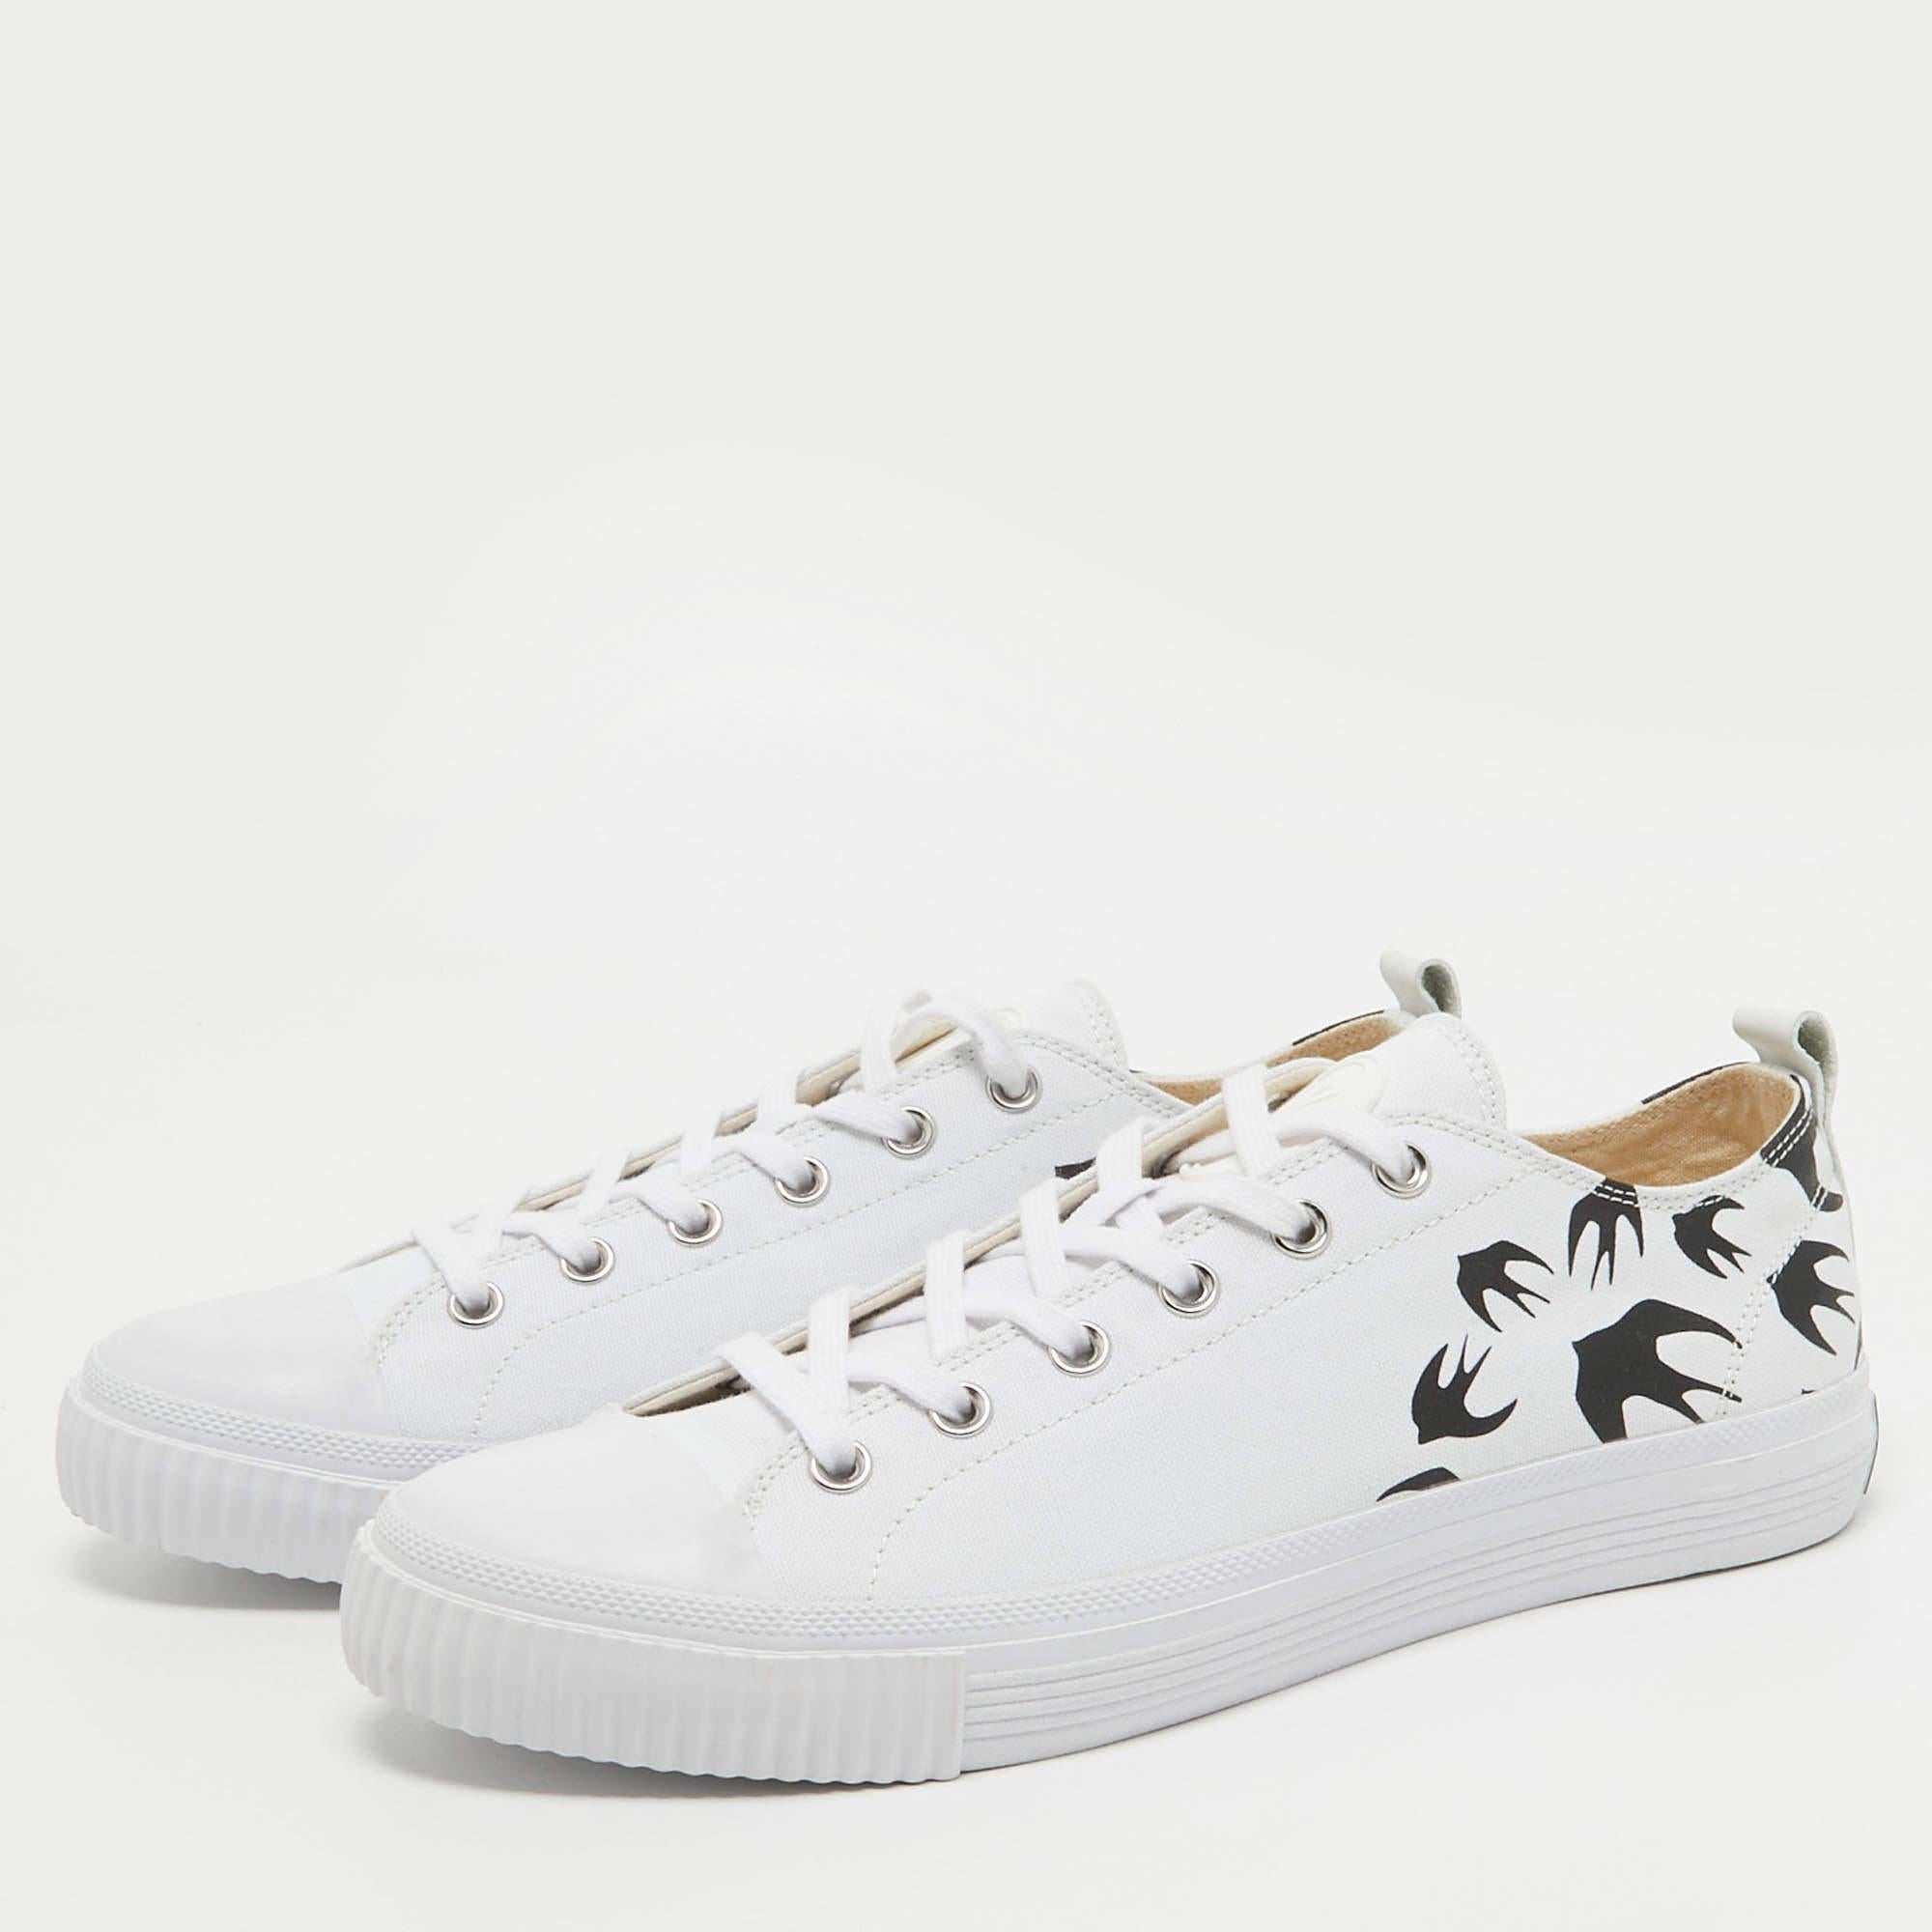 McQ by Alexander McQueen White Canvas Swallow Sneakers Size 44 1